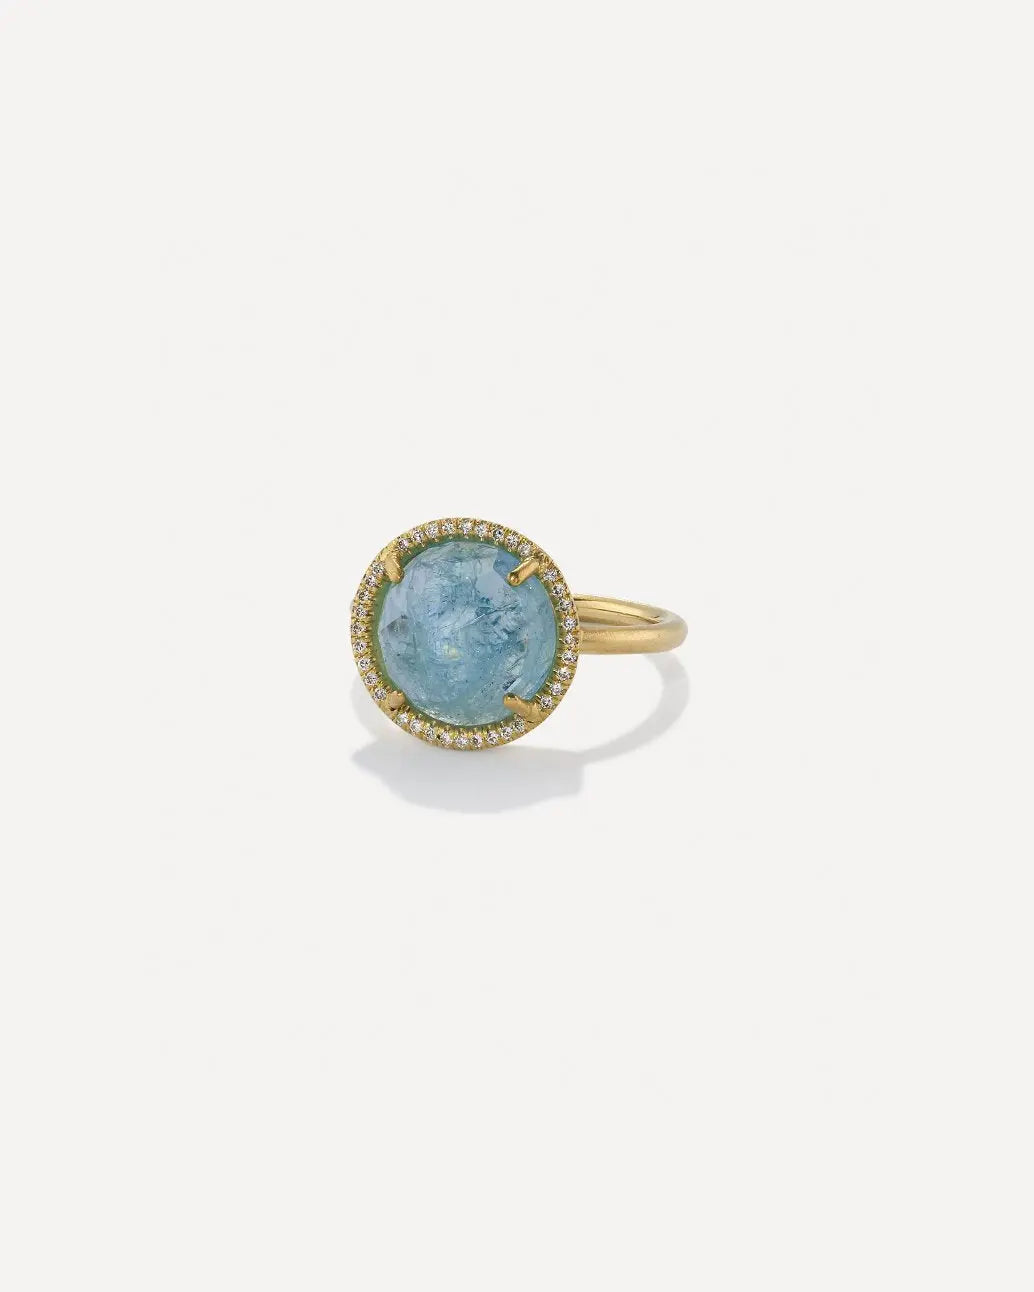 Classic 18k Yellow Gold Ring with 11mm rose cut aquamarine surrounded by Diamond Pave G-H Color/VS-S1  .13 diamond cttw  Ring Size: 7  If you need a different size, please email shop@sbvail.com  Designed by Irene Neuwirth